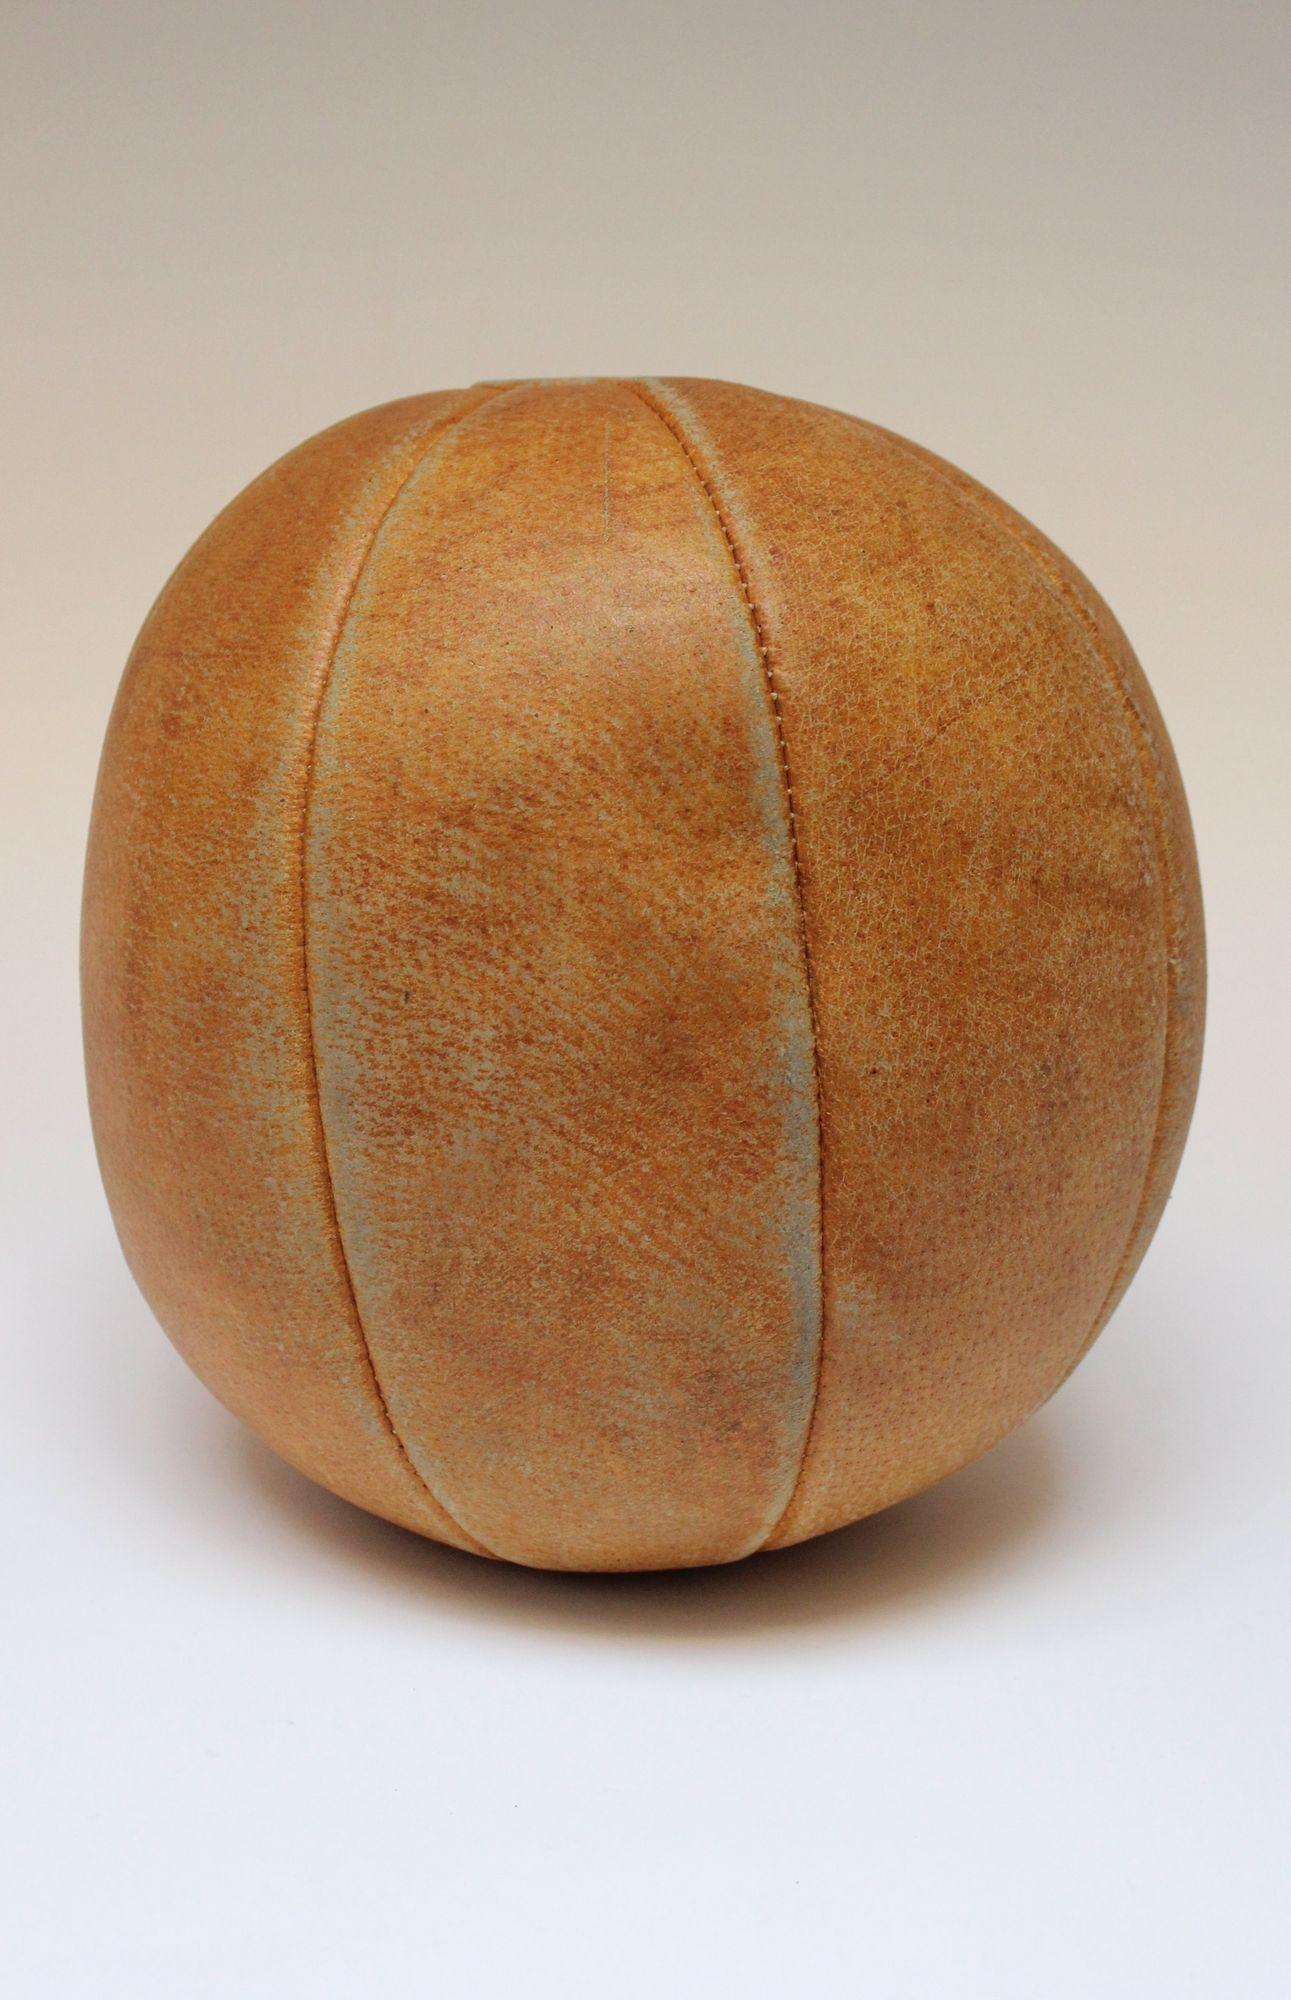 Leather medicine ball, circa 1940s, Germany.
Perfectly aged patina with natural wear/soiling present, as shown.
H: 13